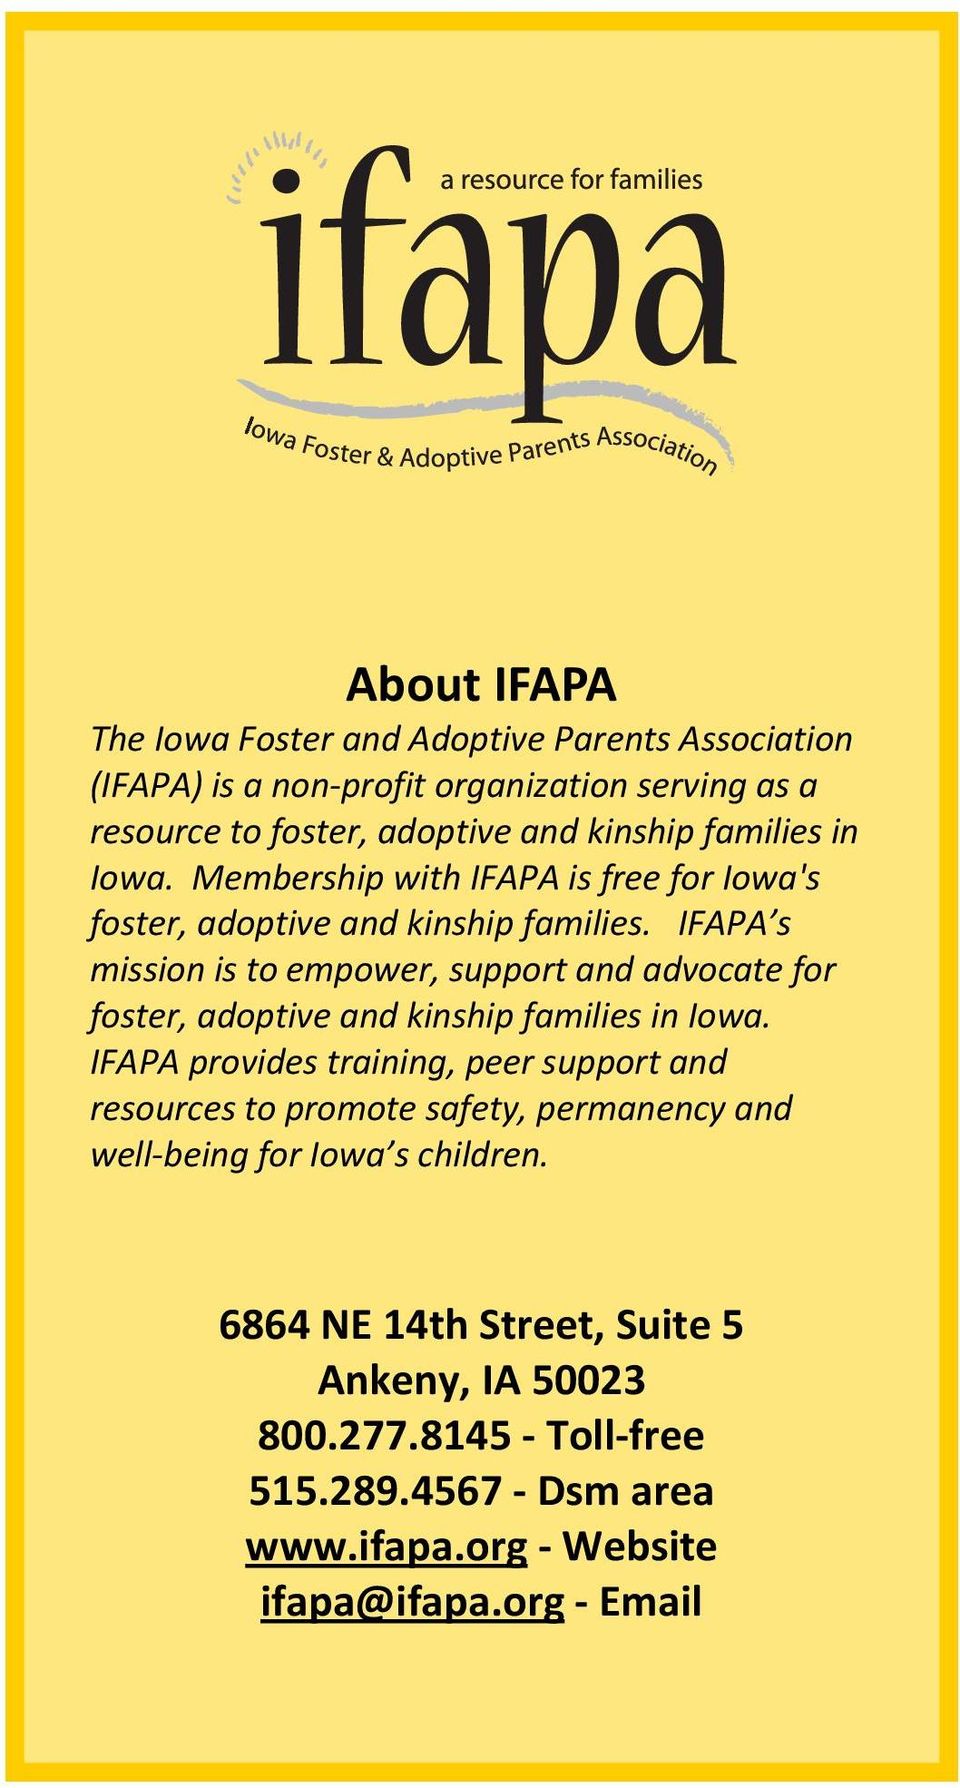 IFAPA s mission is to empower, support and advocate for foster, adoptive and kinship families in Iowa.